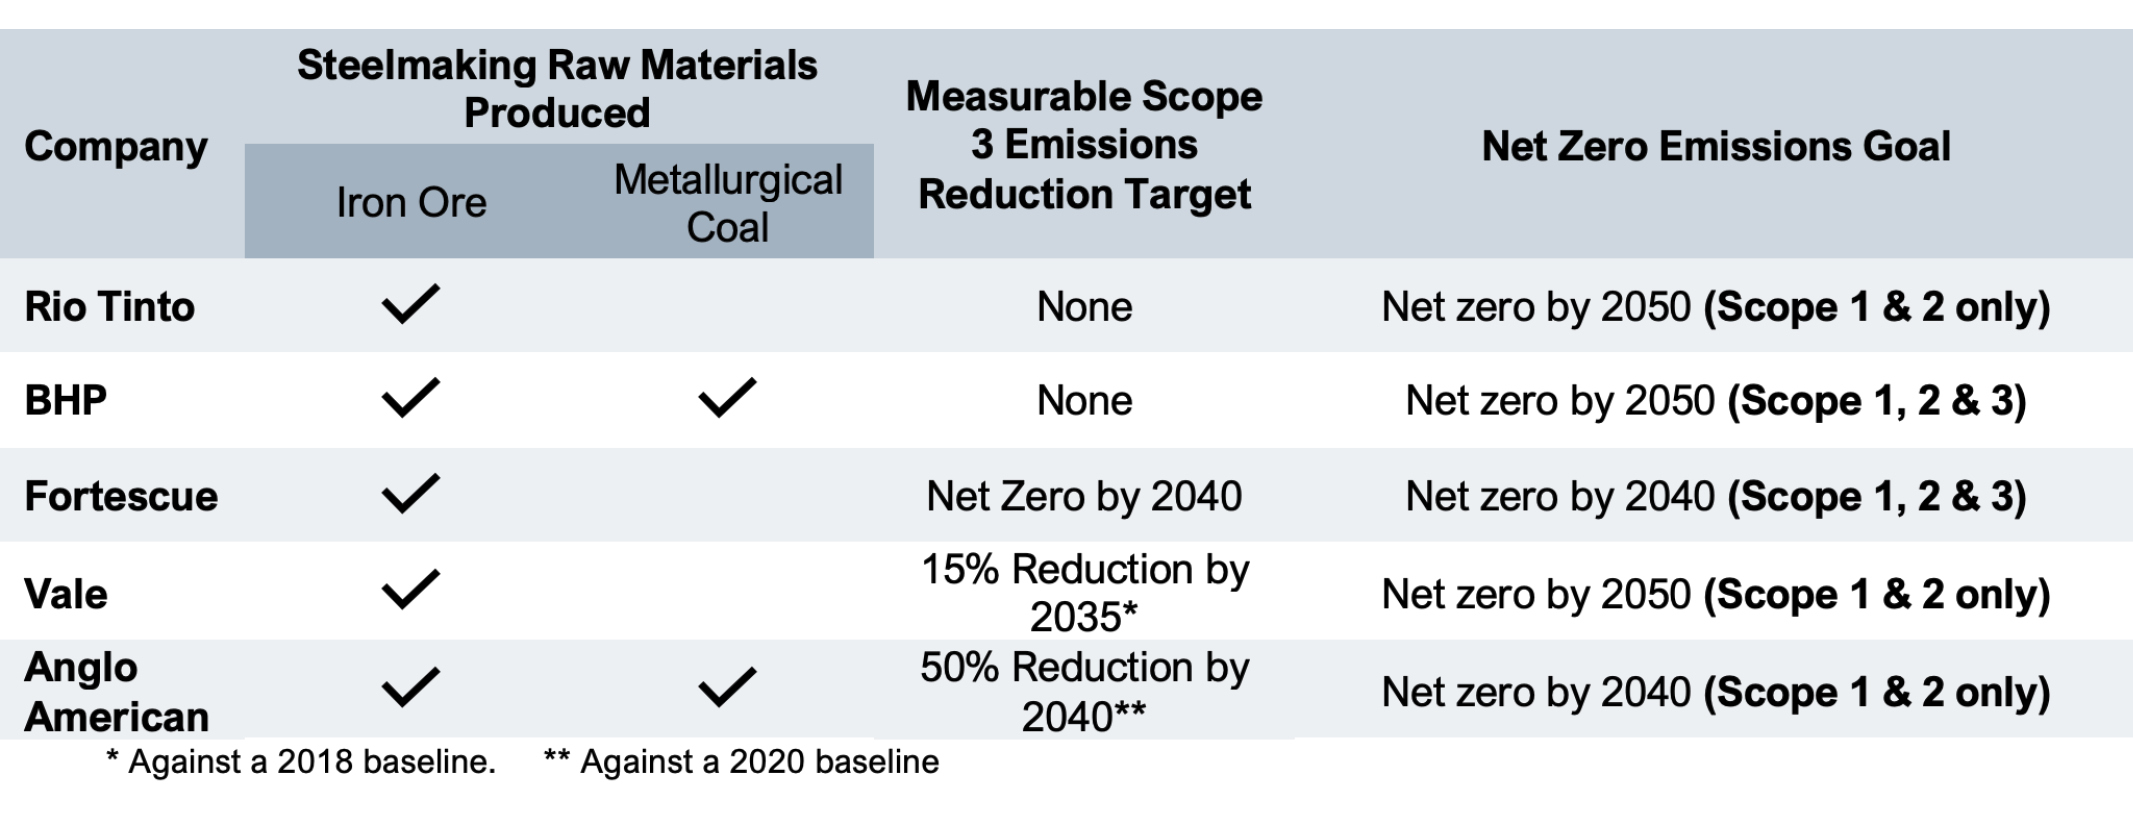 major steel supply chain miners scope 3 emissions targets